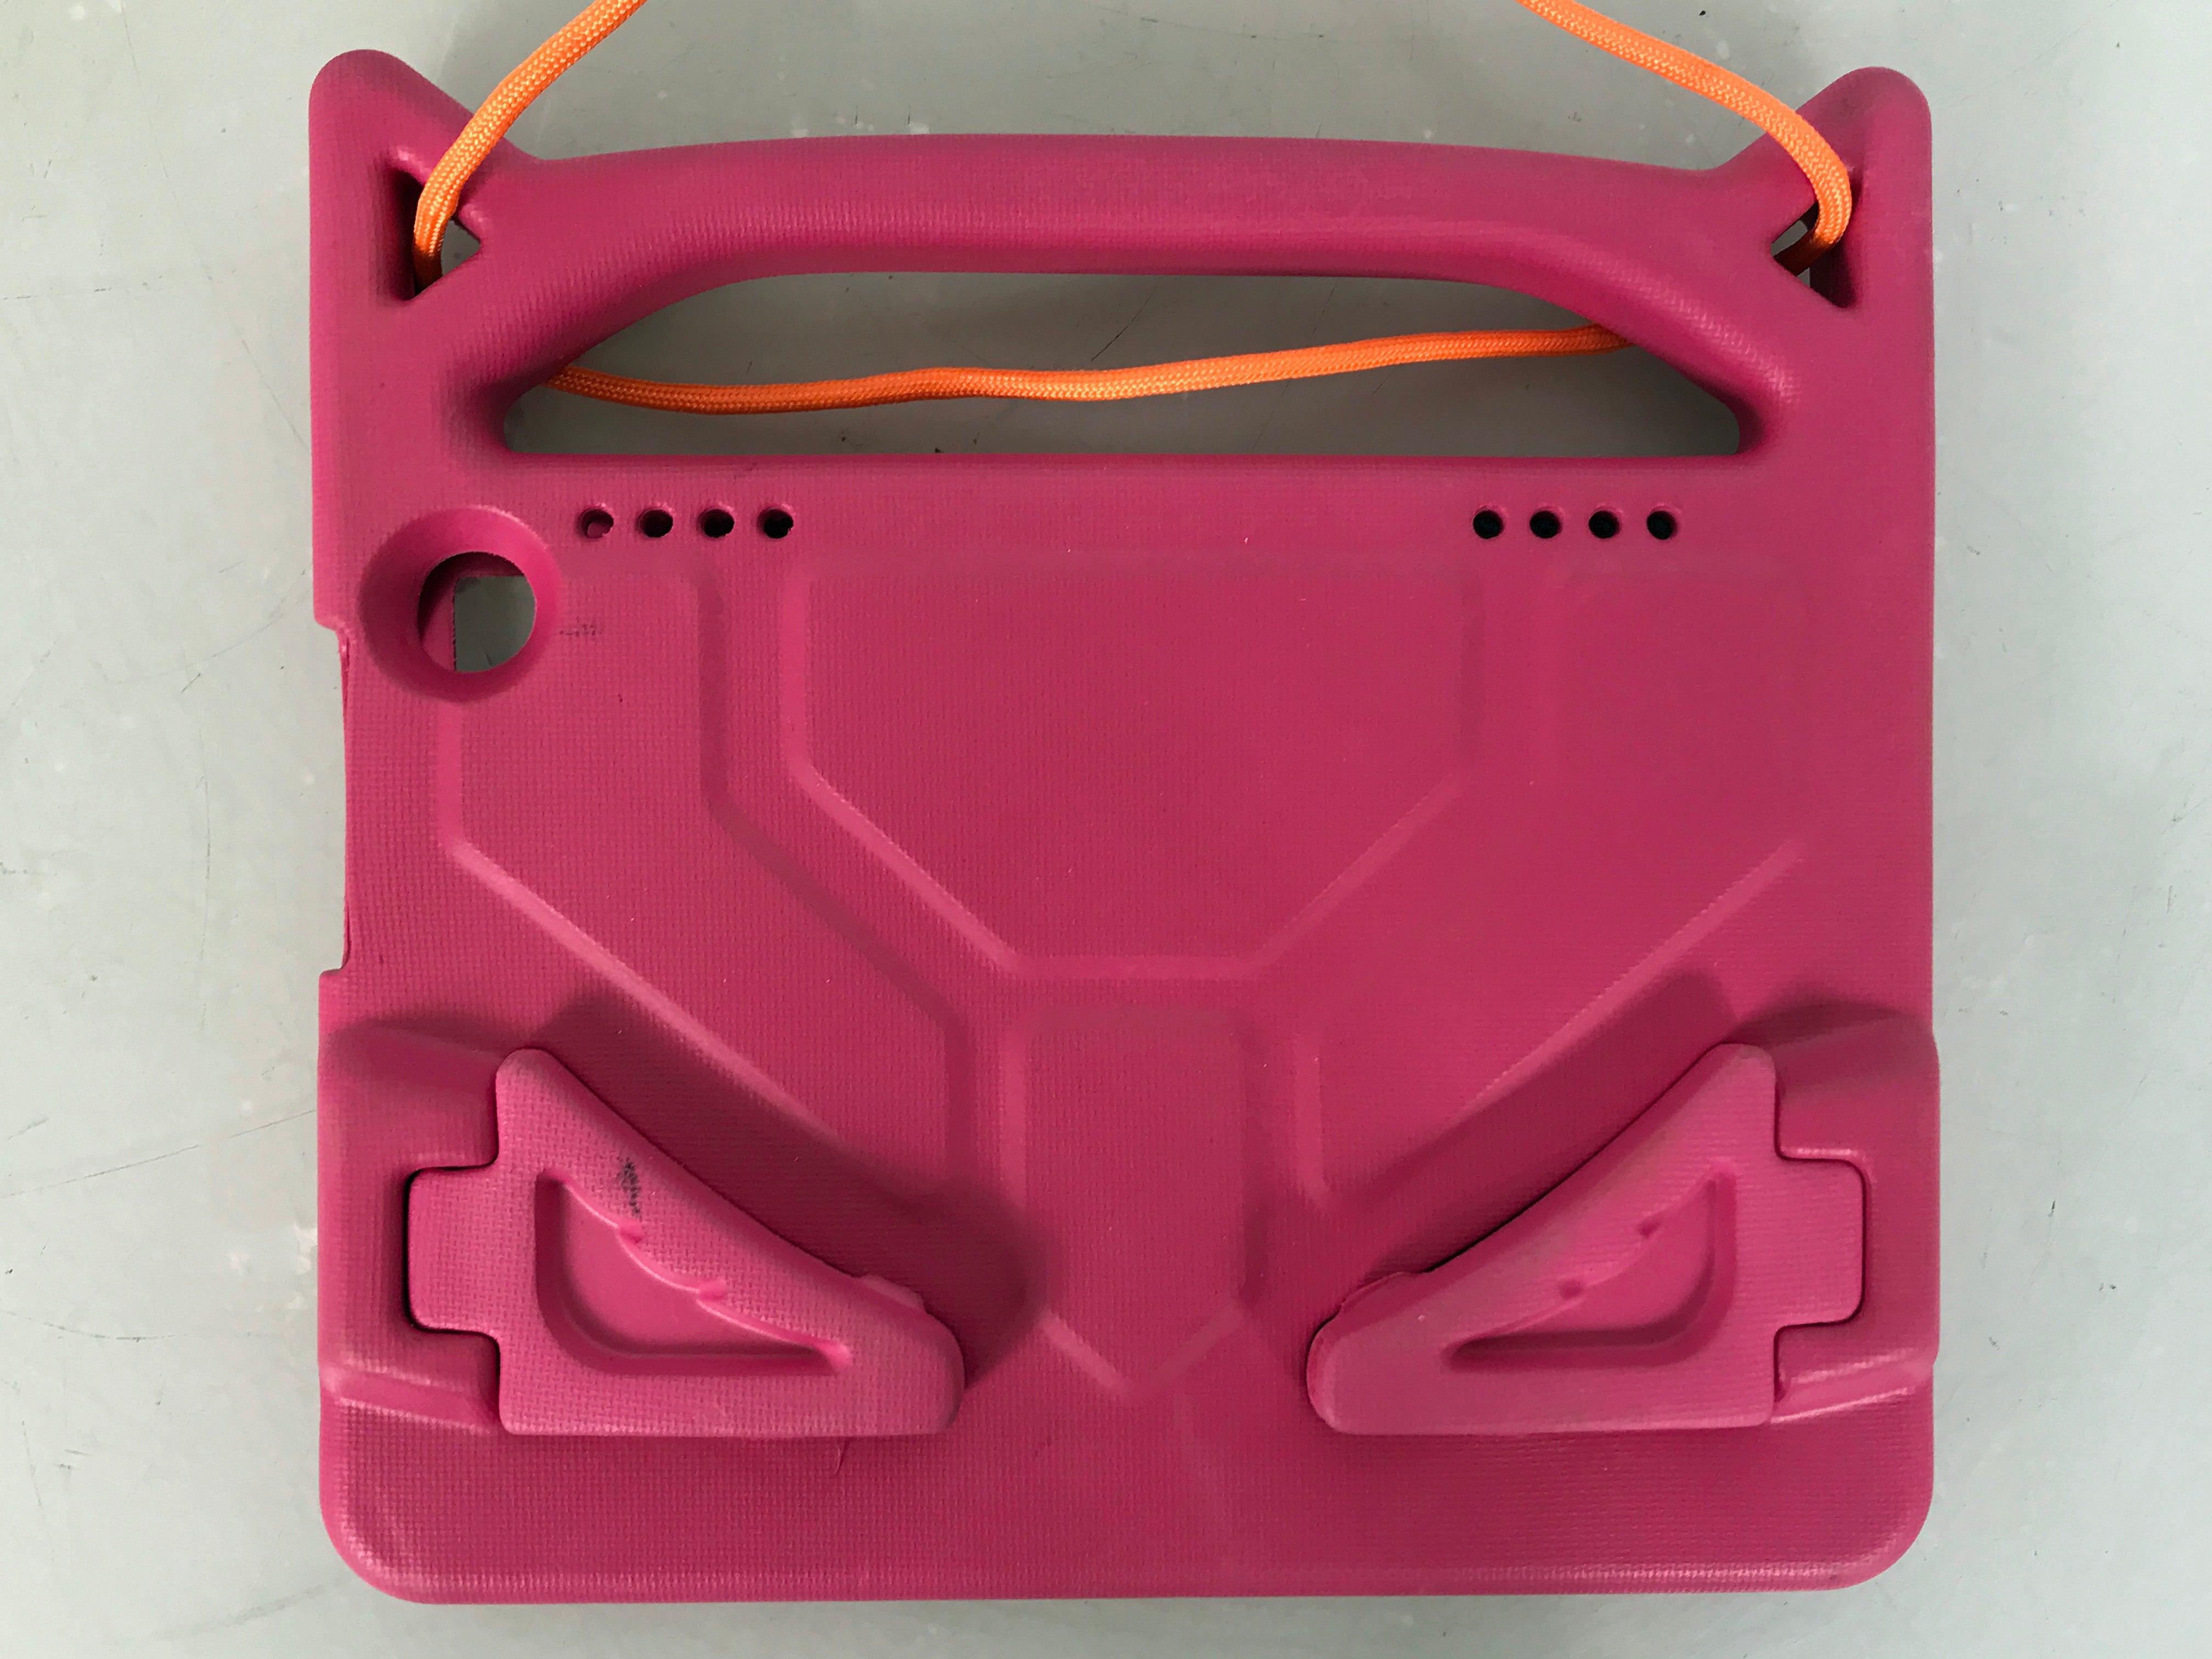 Generic Pink Fire HD 8 Tablet Case